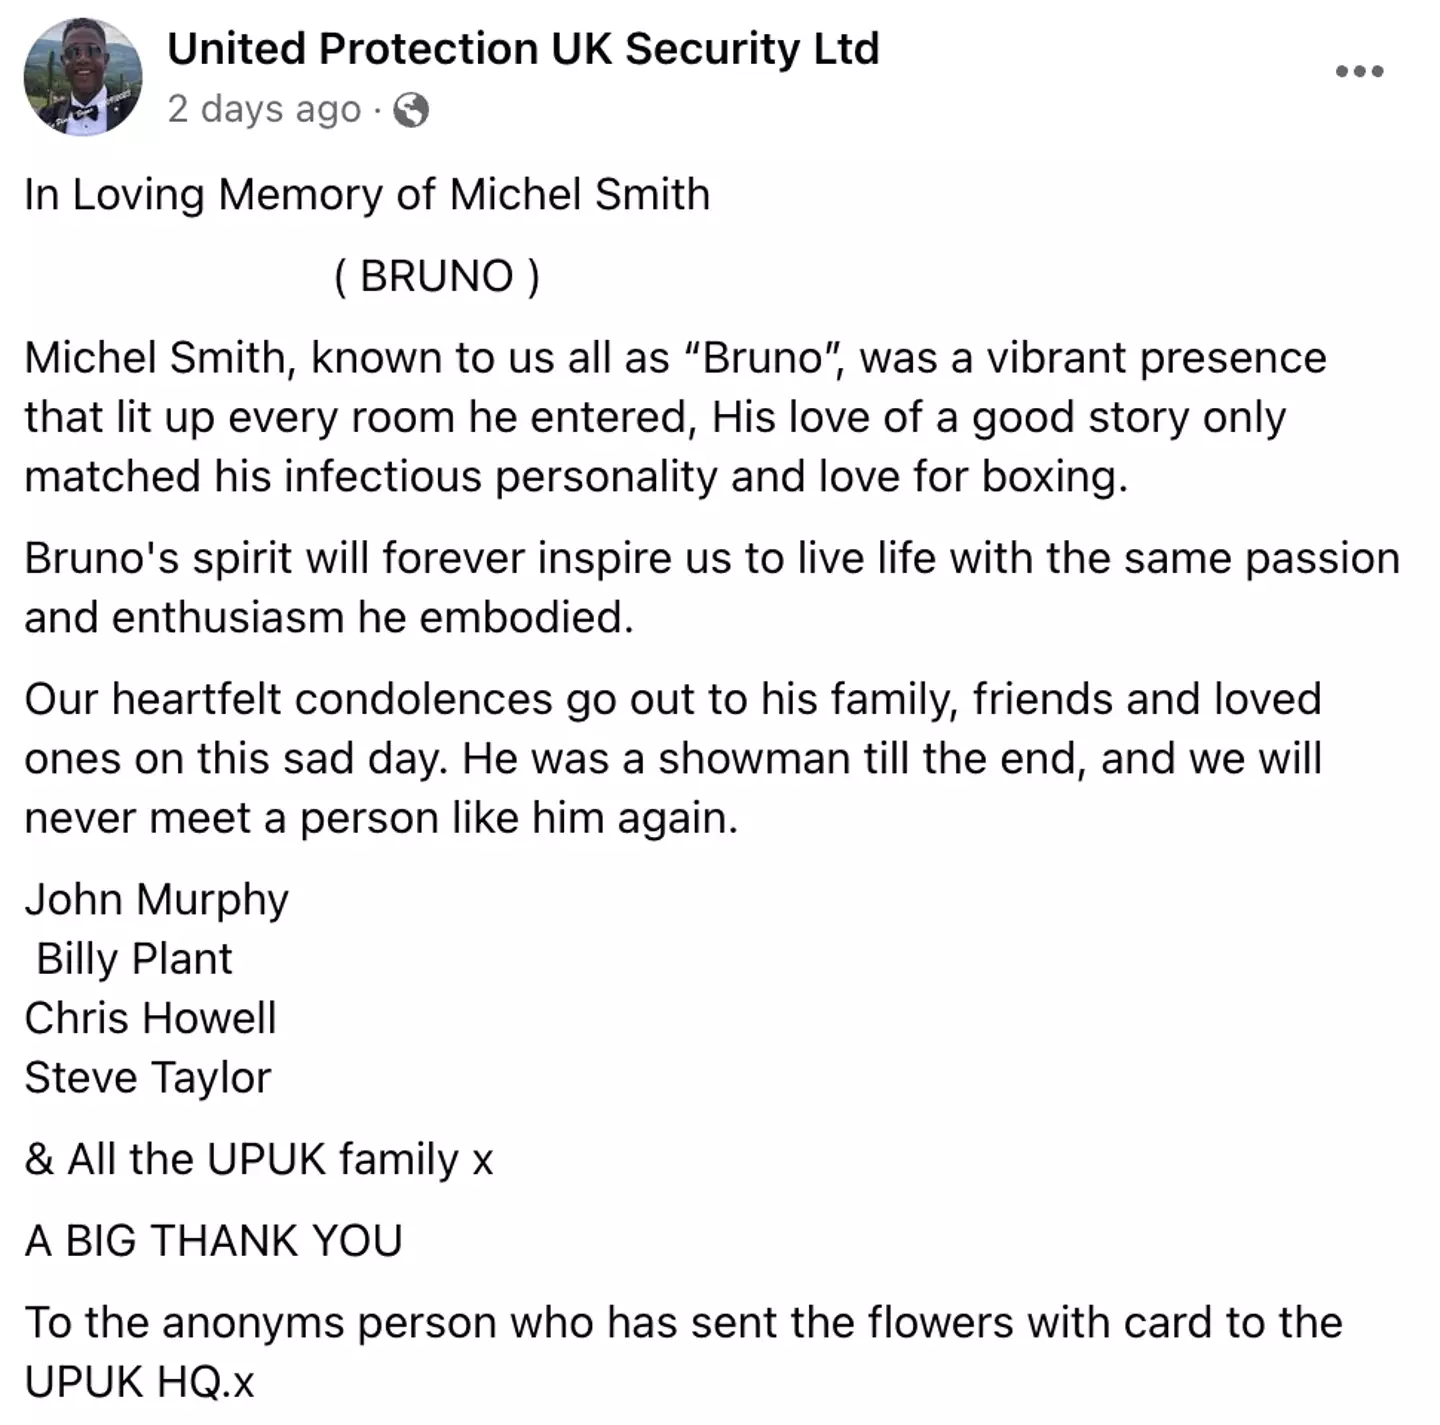 The company that provided security for the festival also released a tribute for Michael.